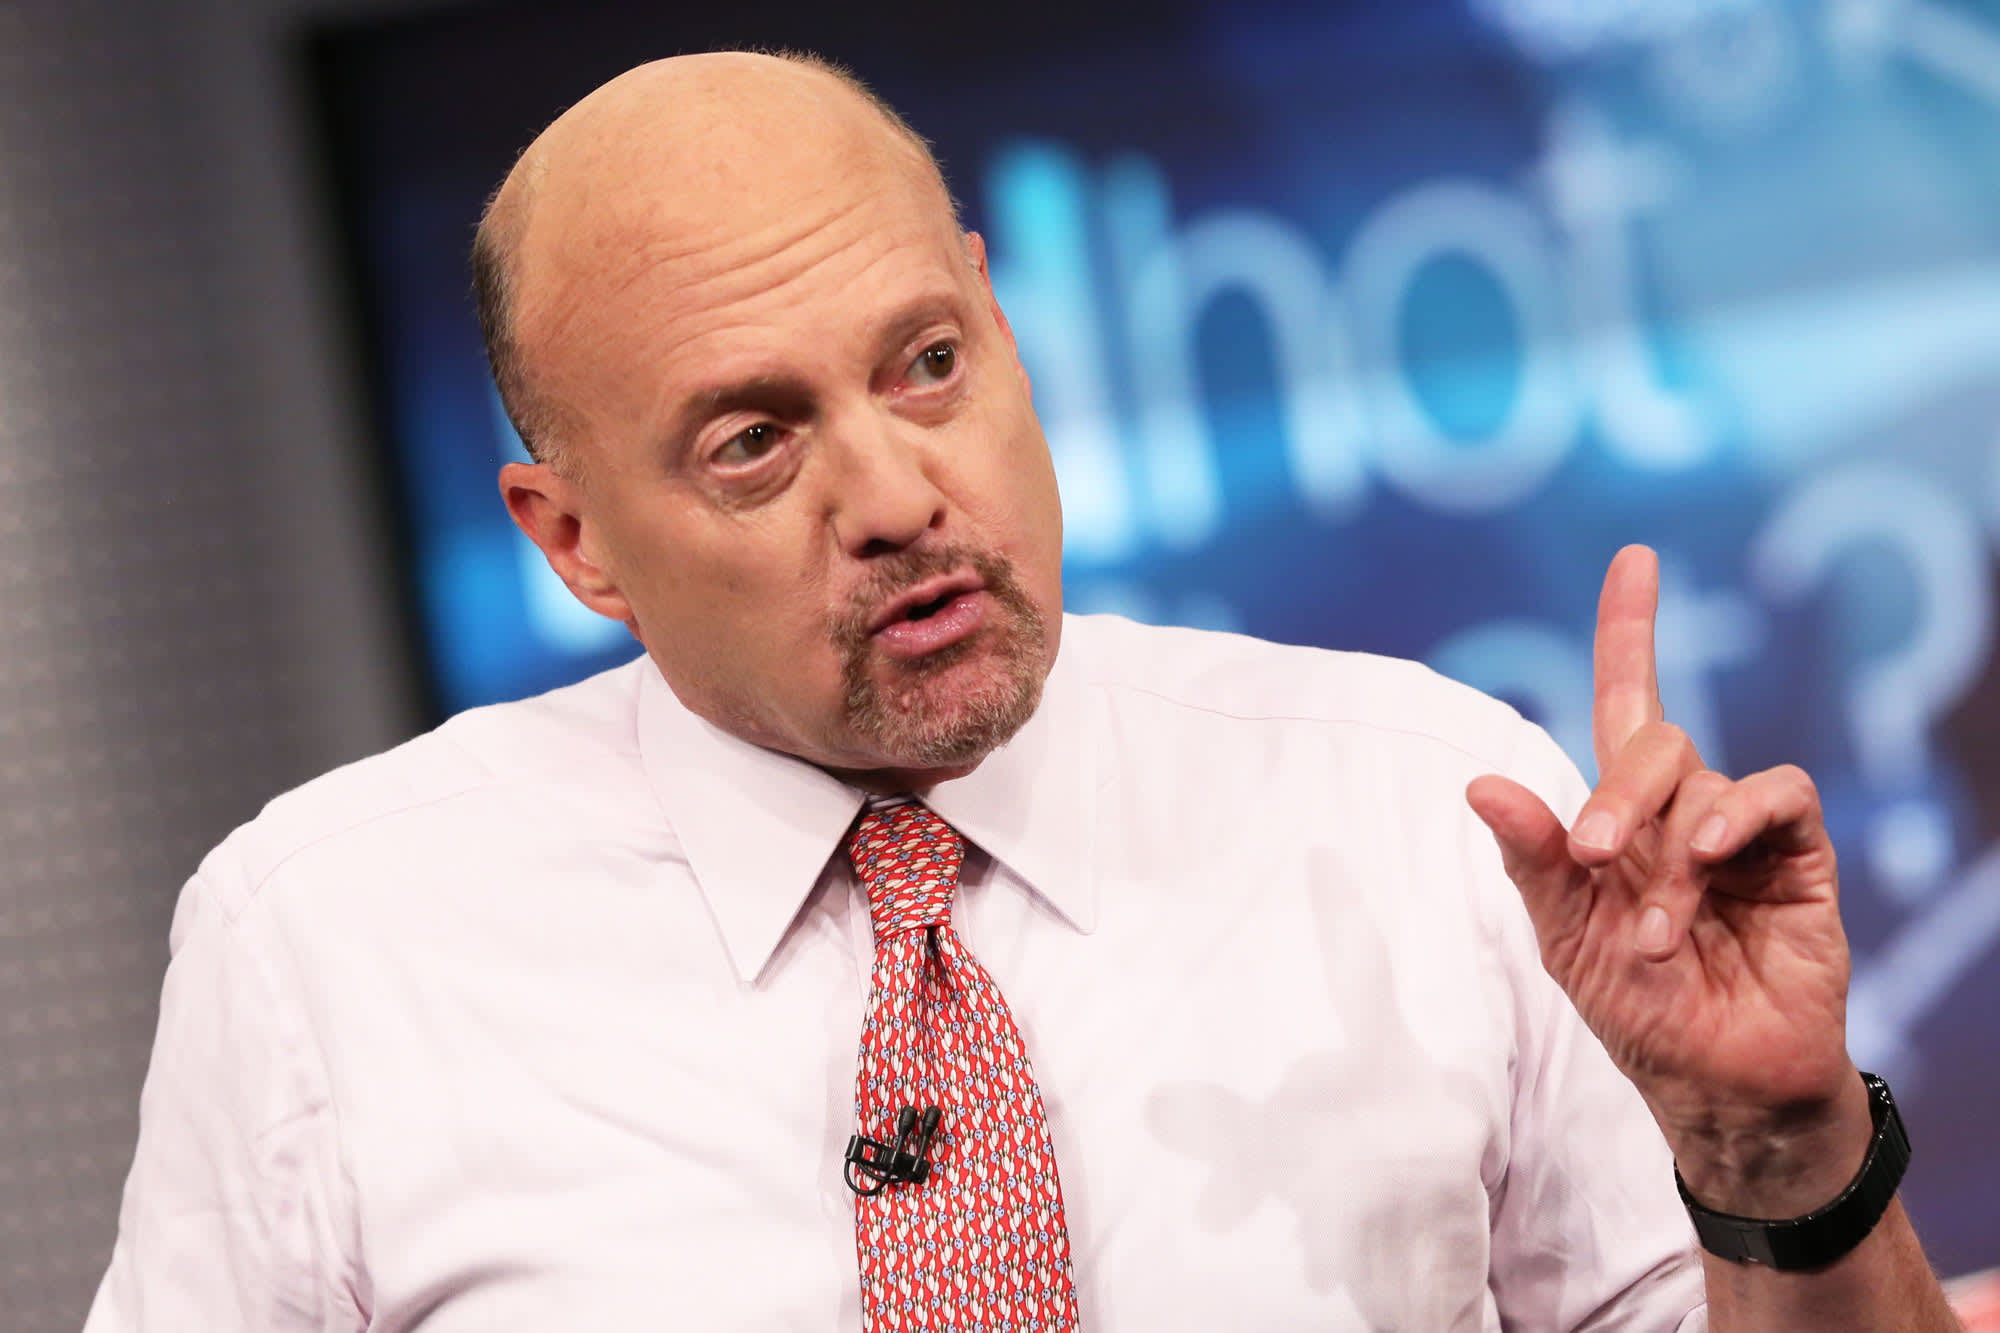 Jim Cramer sees signs that inflationary pressures are easing, believes the Fed’s political approach is correct